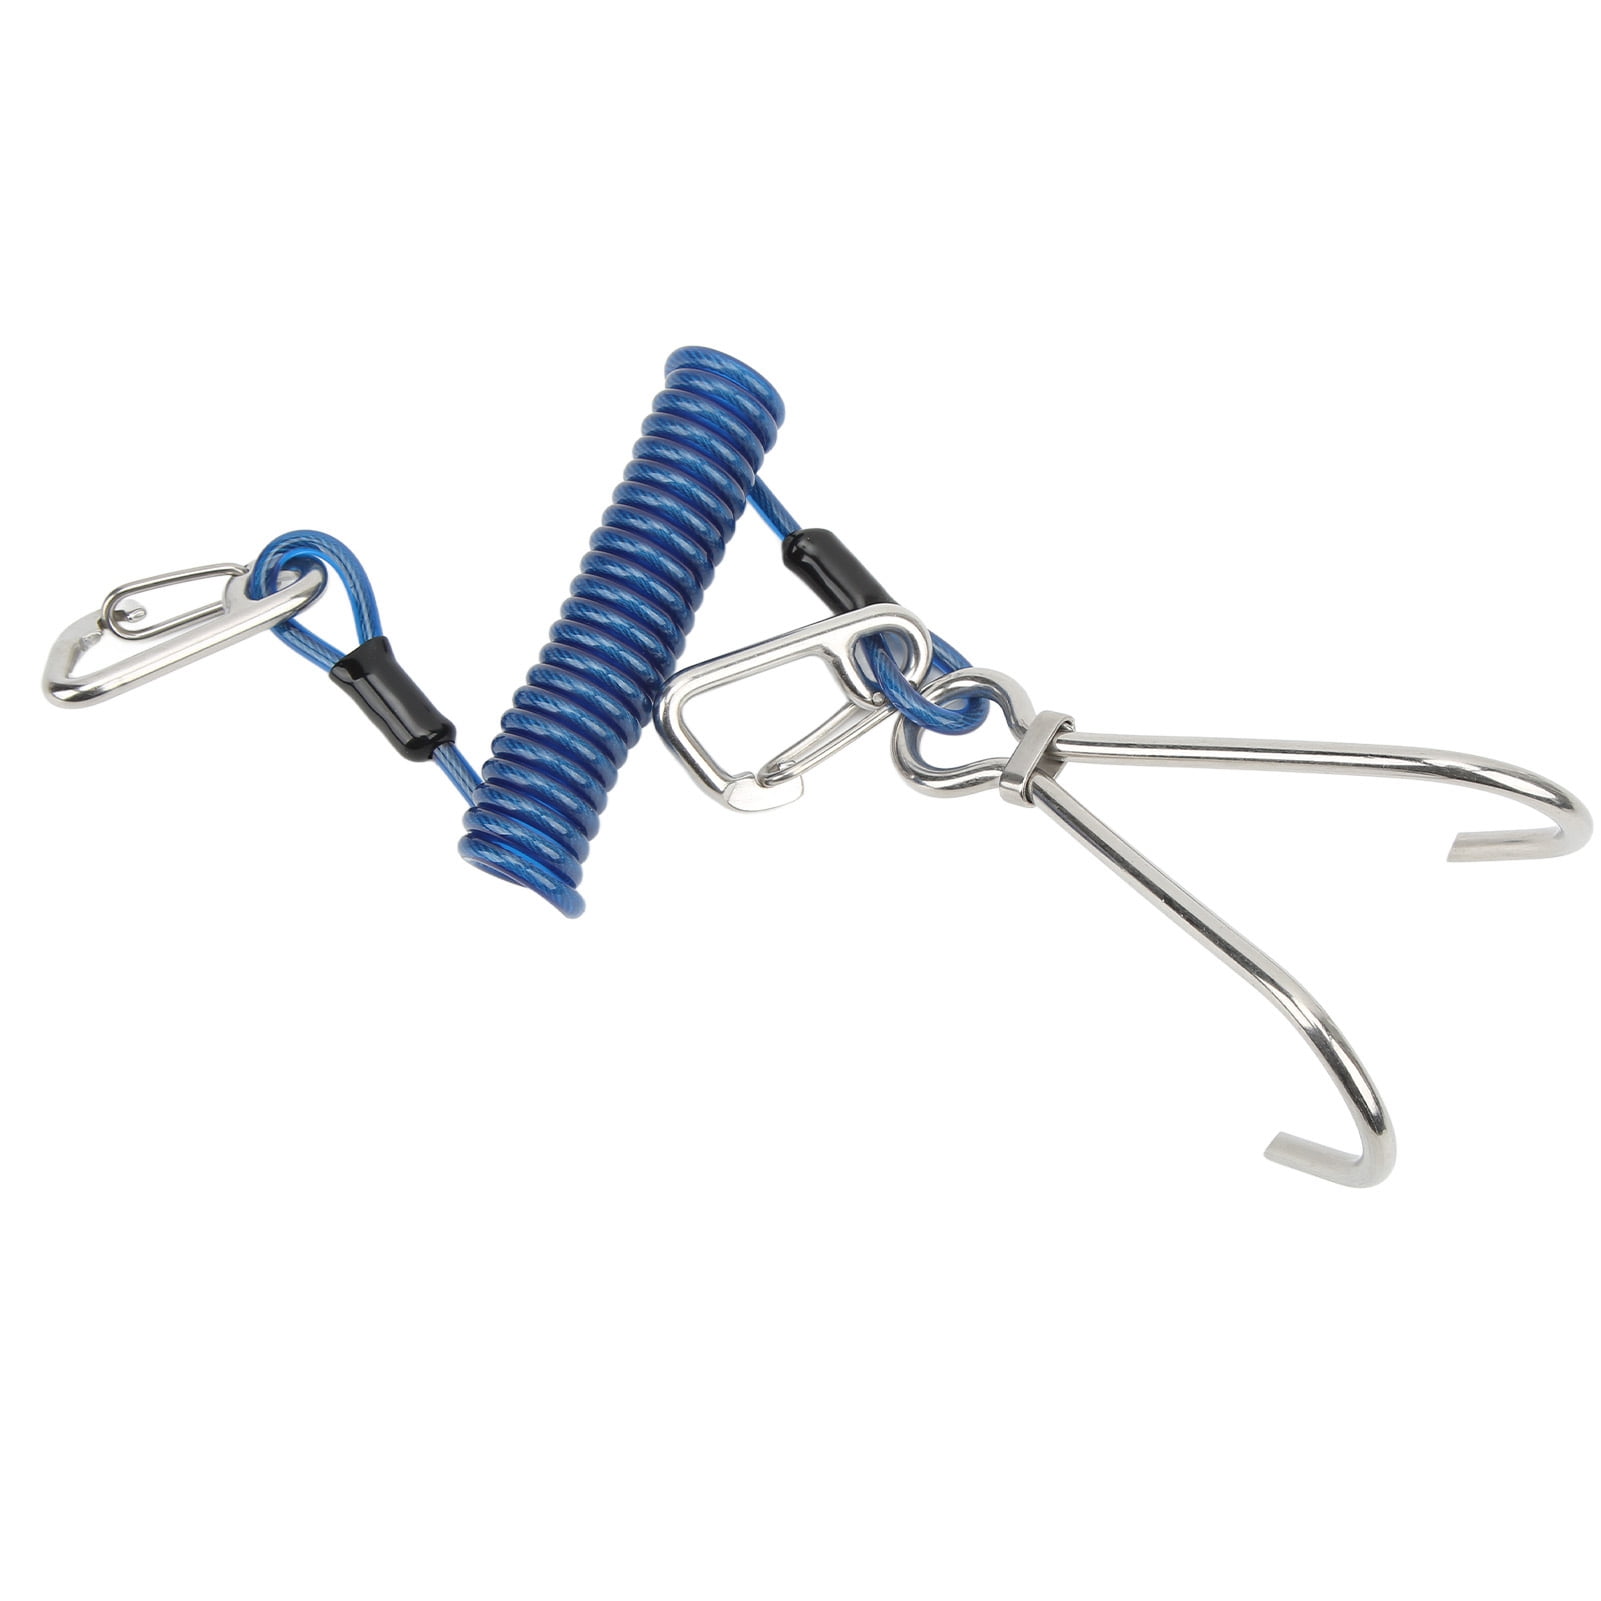 Scuba Diving SS Reef Drift Double Hook with 1.3M Spiral Coil Lanyard 